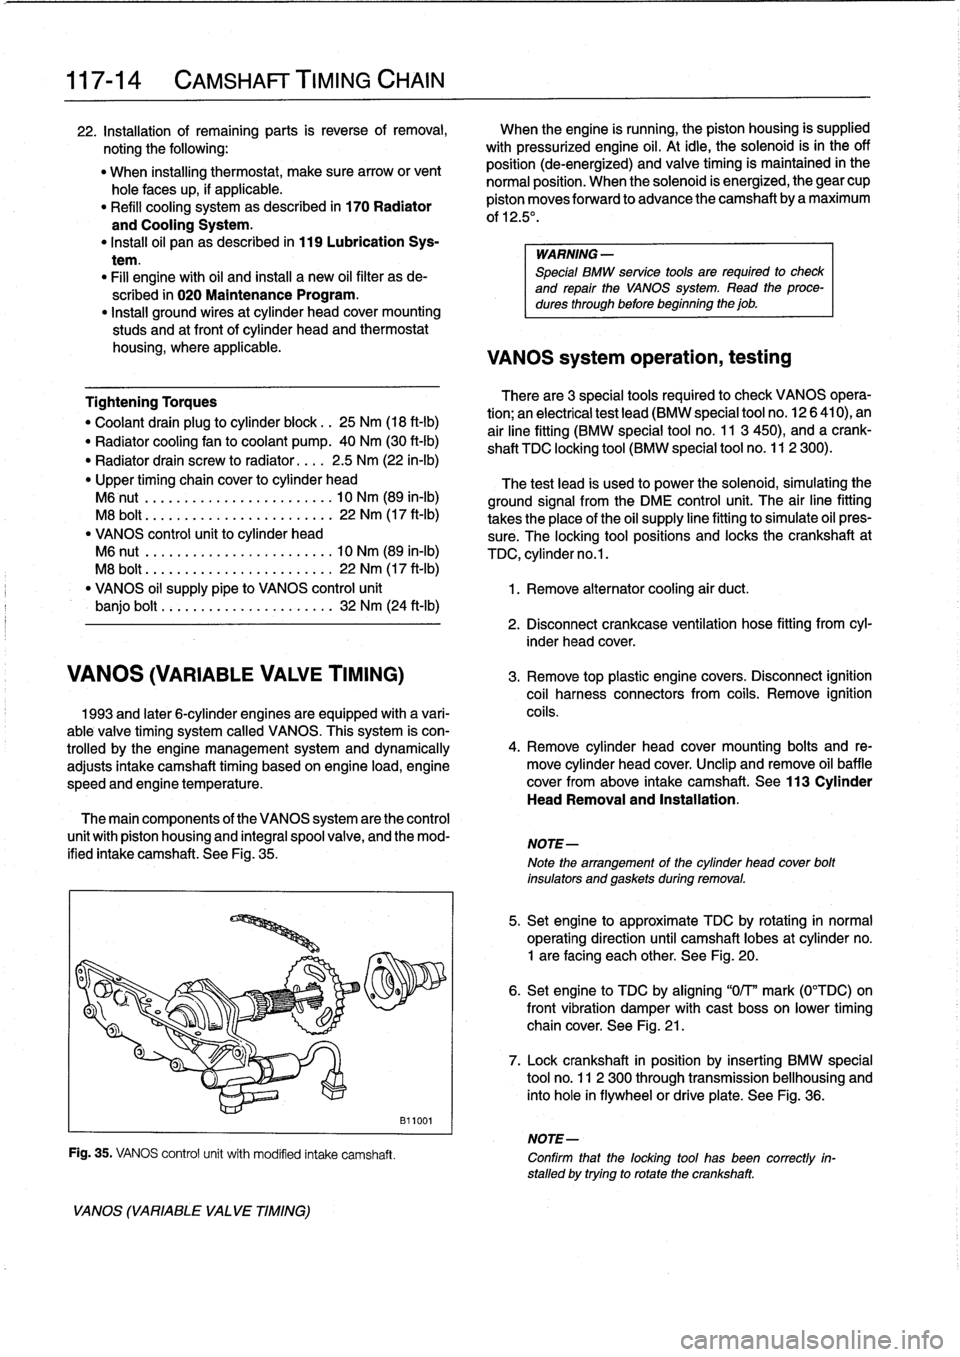 BMW 325i 1994 E36 Workshop Manual 
117-
1
4

	

CAMSHAFT
TIMING
CHAIN

22
.
Installation
of
remaining
parts
is
reverse
of
removal,

	

When
theengine
is
running,
the
piston
housing
is
supplied

noting
the
following
:

	

with
pressuri